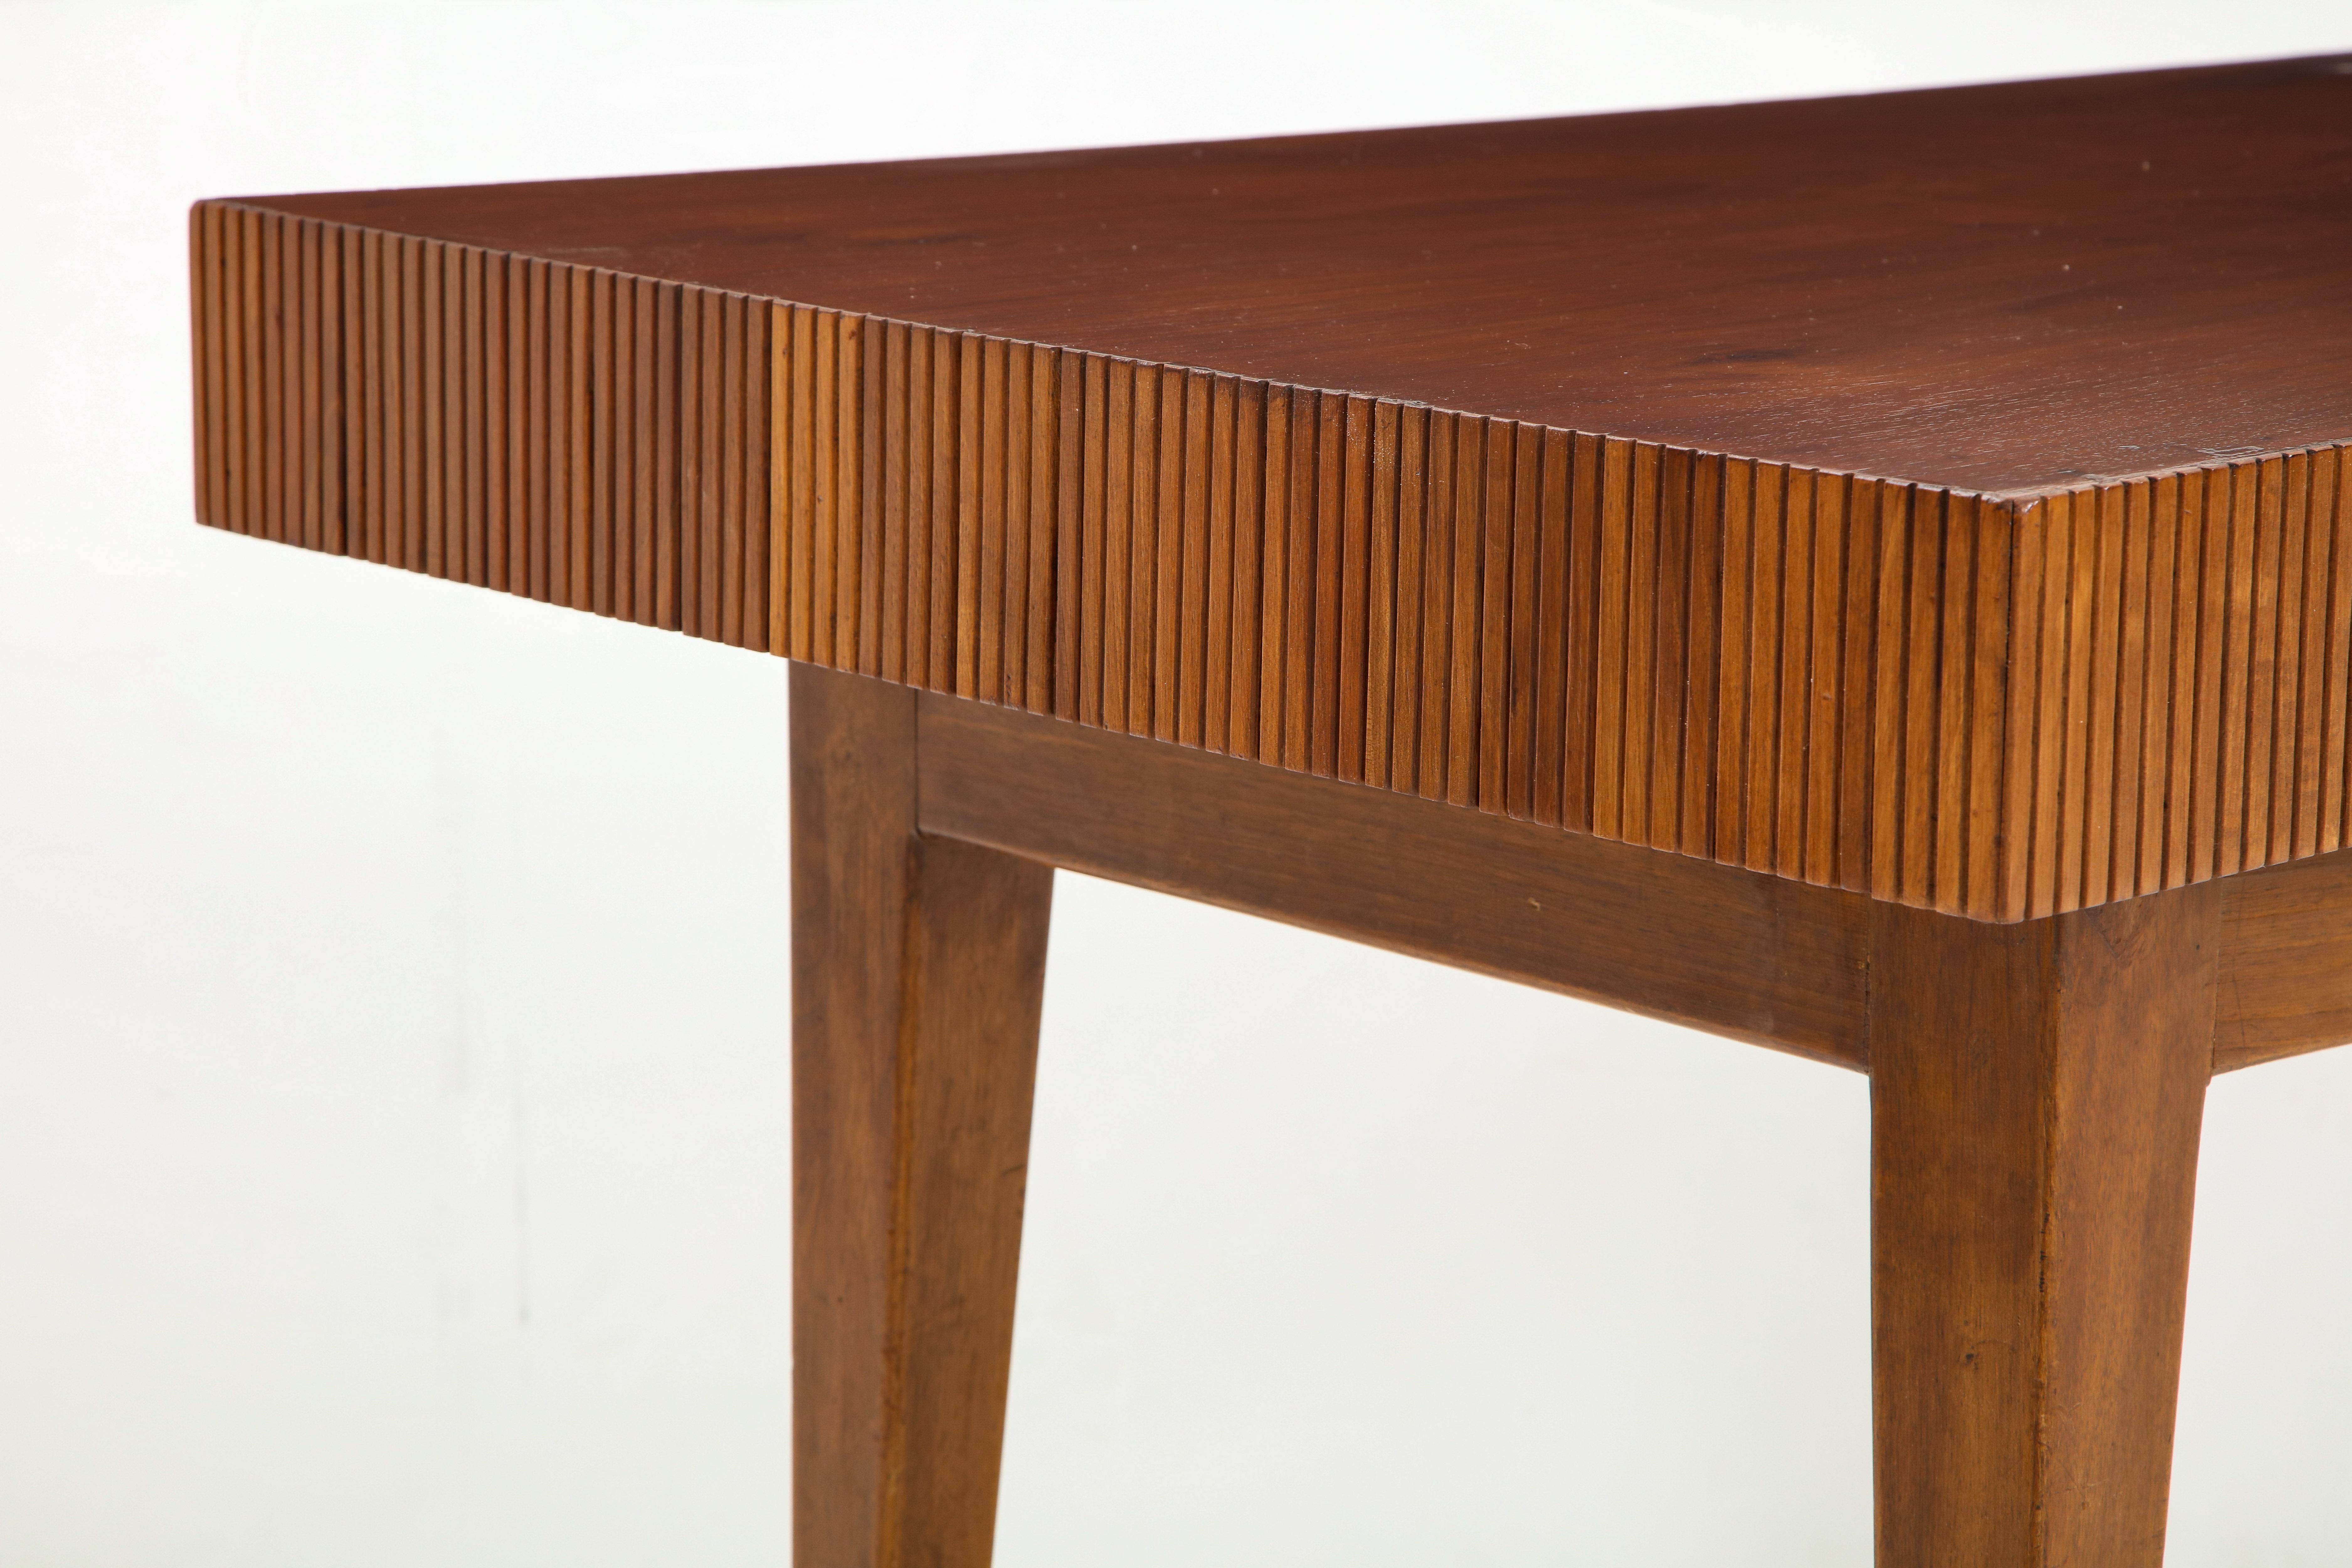 Italian Walnut Table with Single Drawer and Tapered Legs, Style of Gio Ponti (Walnuss)